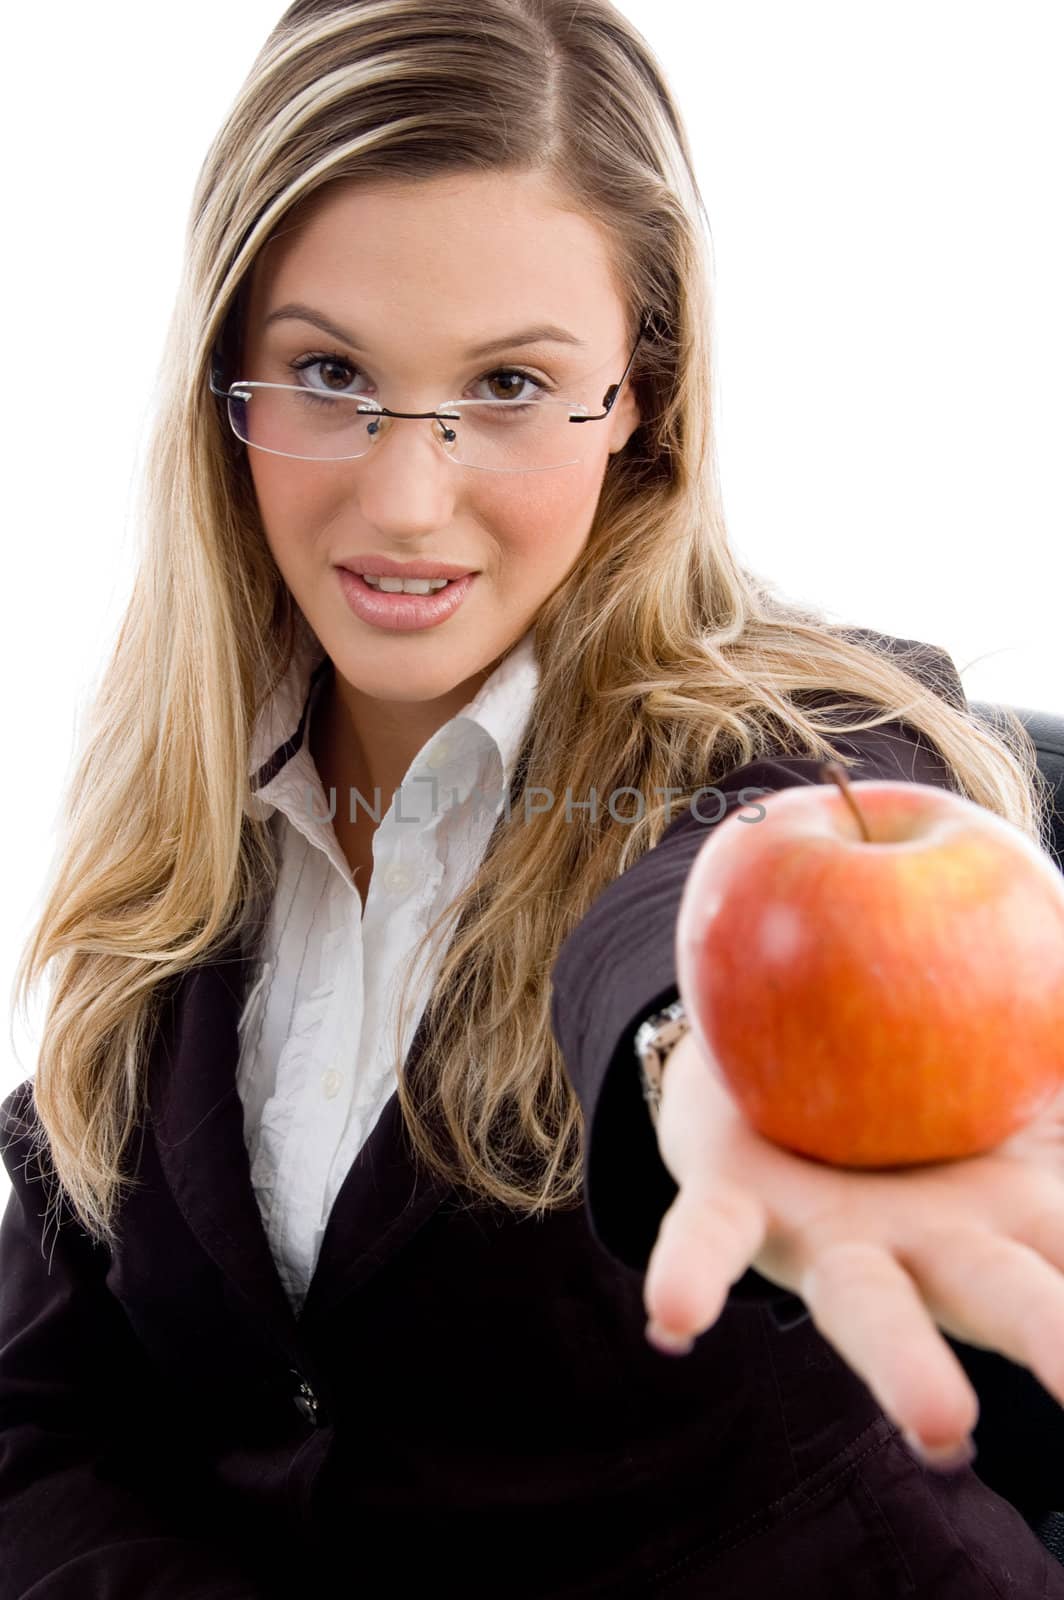 young woman showing apple by imagerymajestic